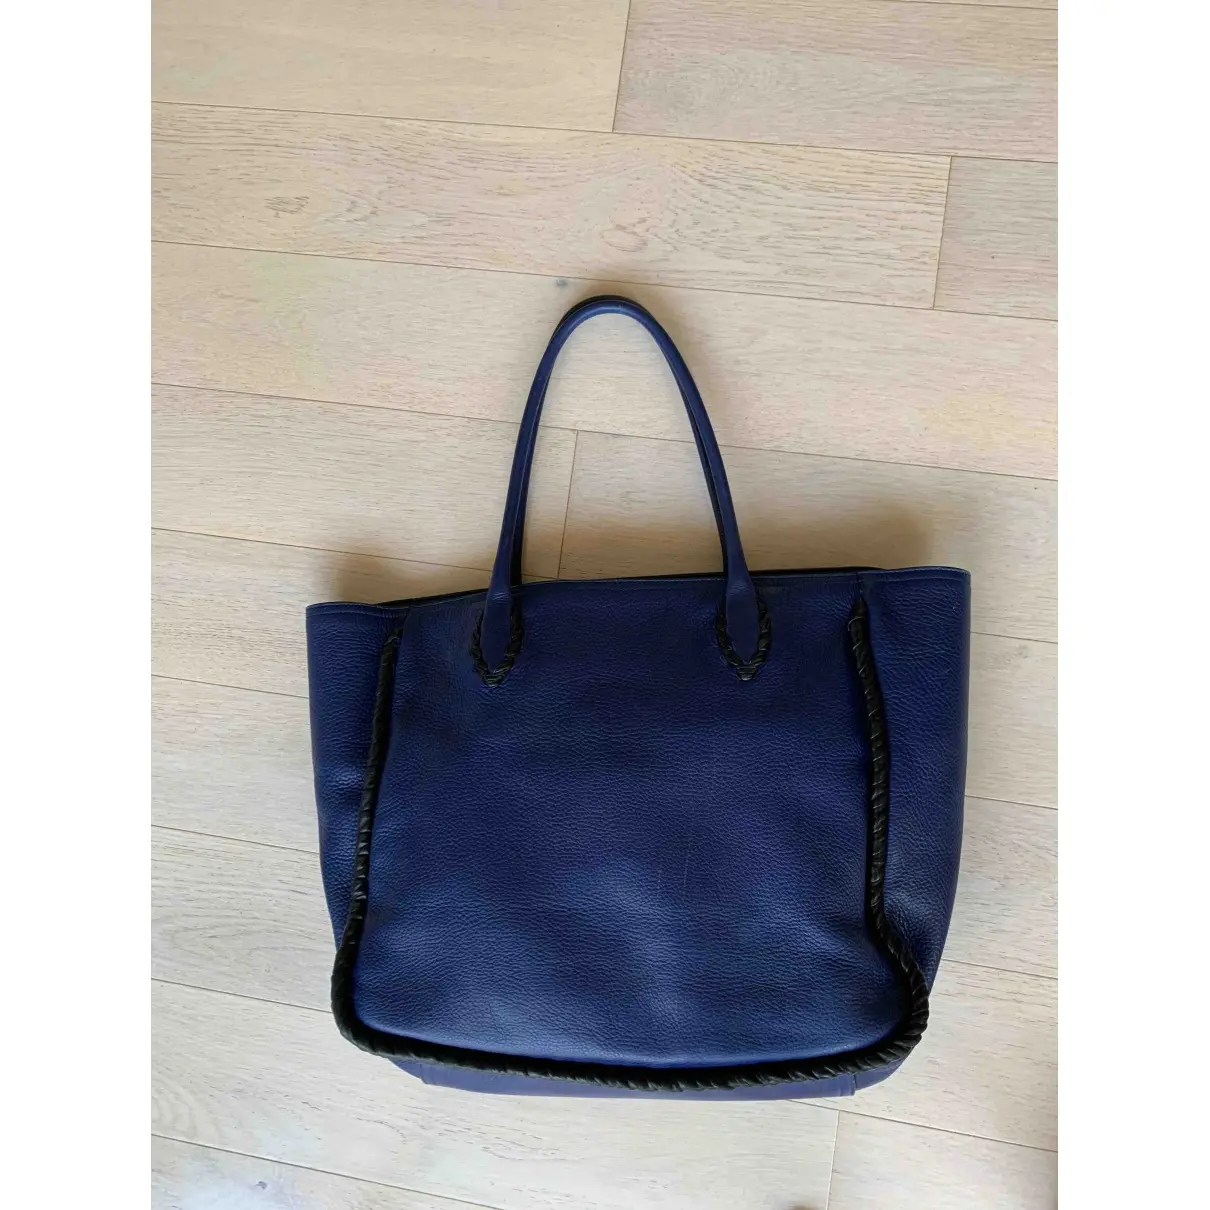 Buy Nina Ricci Leather tote online